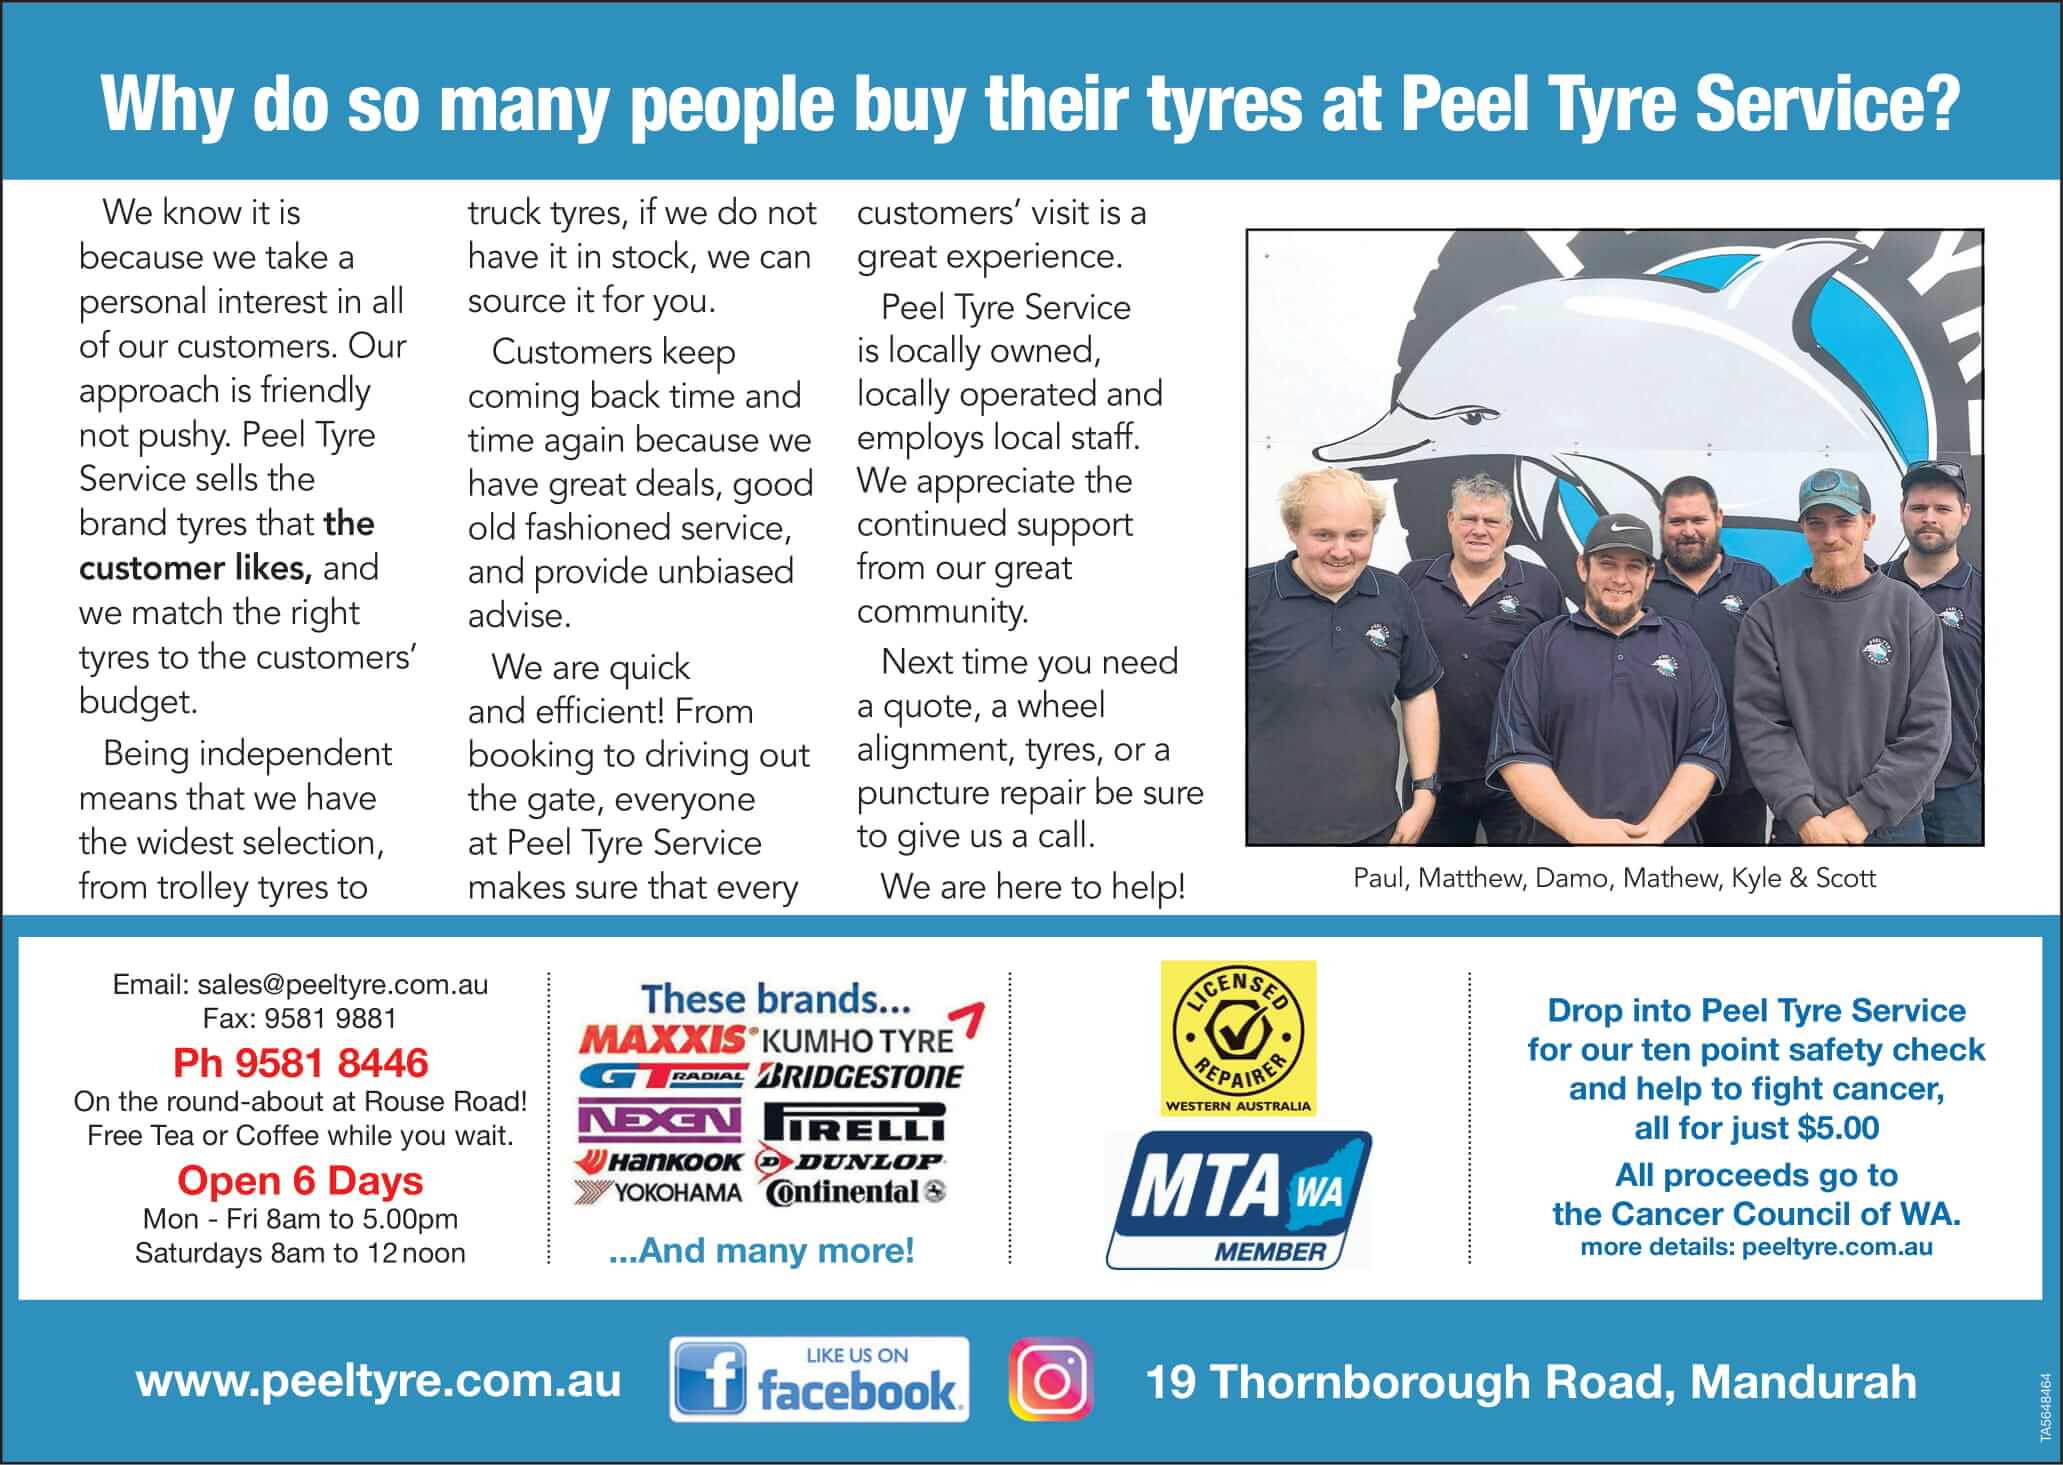 Why do people buy from Peel Tyre?